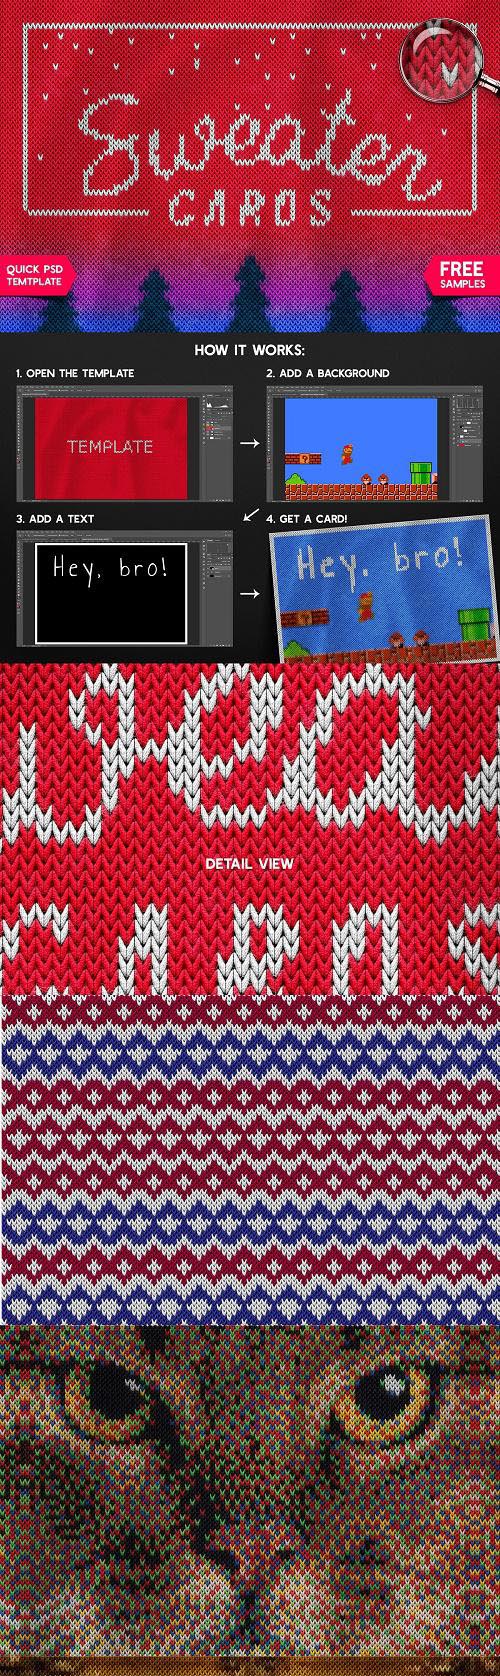 Christmas Sweater Photoshop Template - 3143312